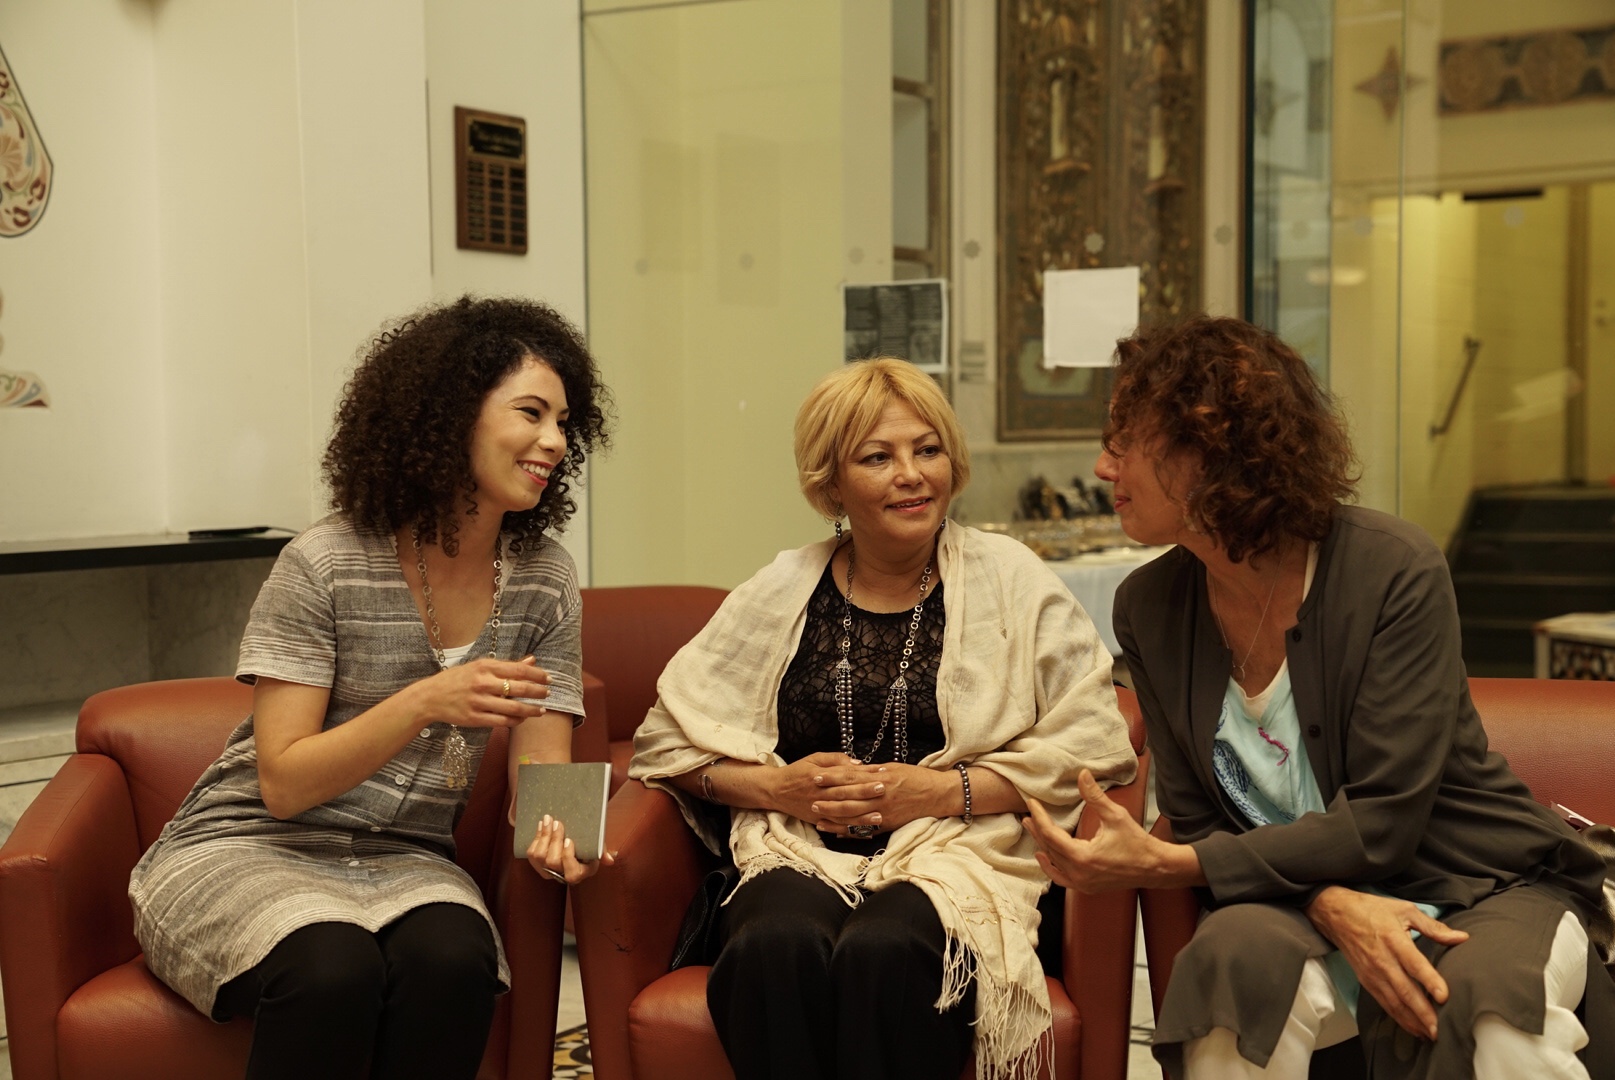 Three women sit smiling and talking to one another